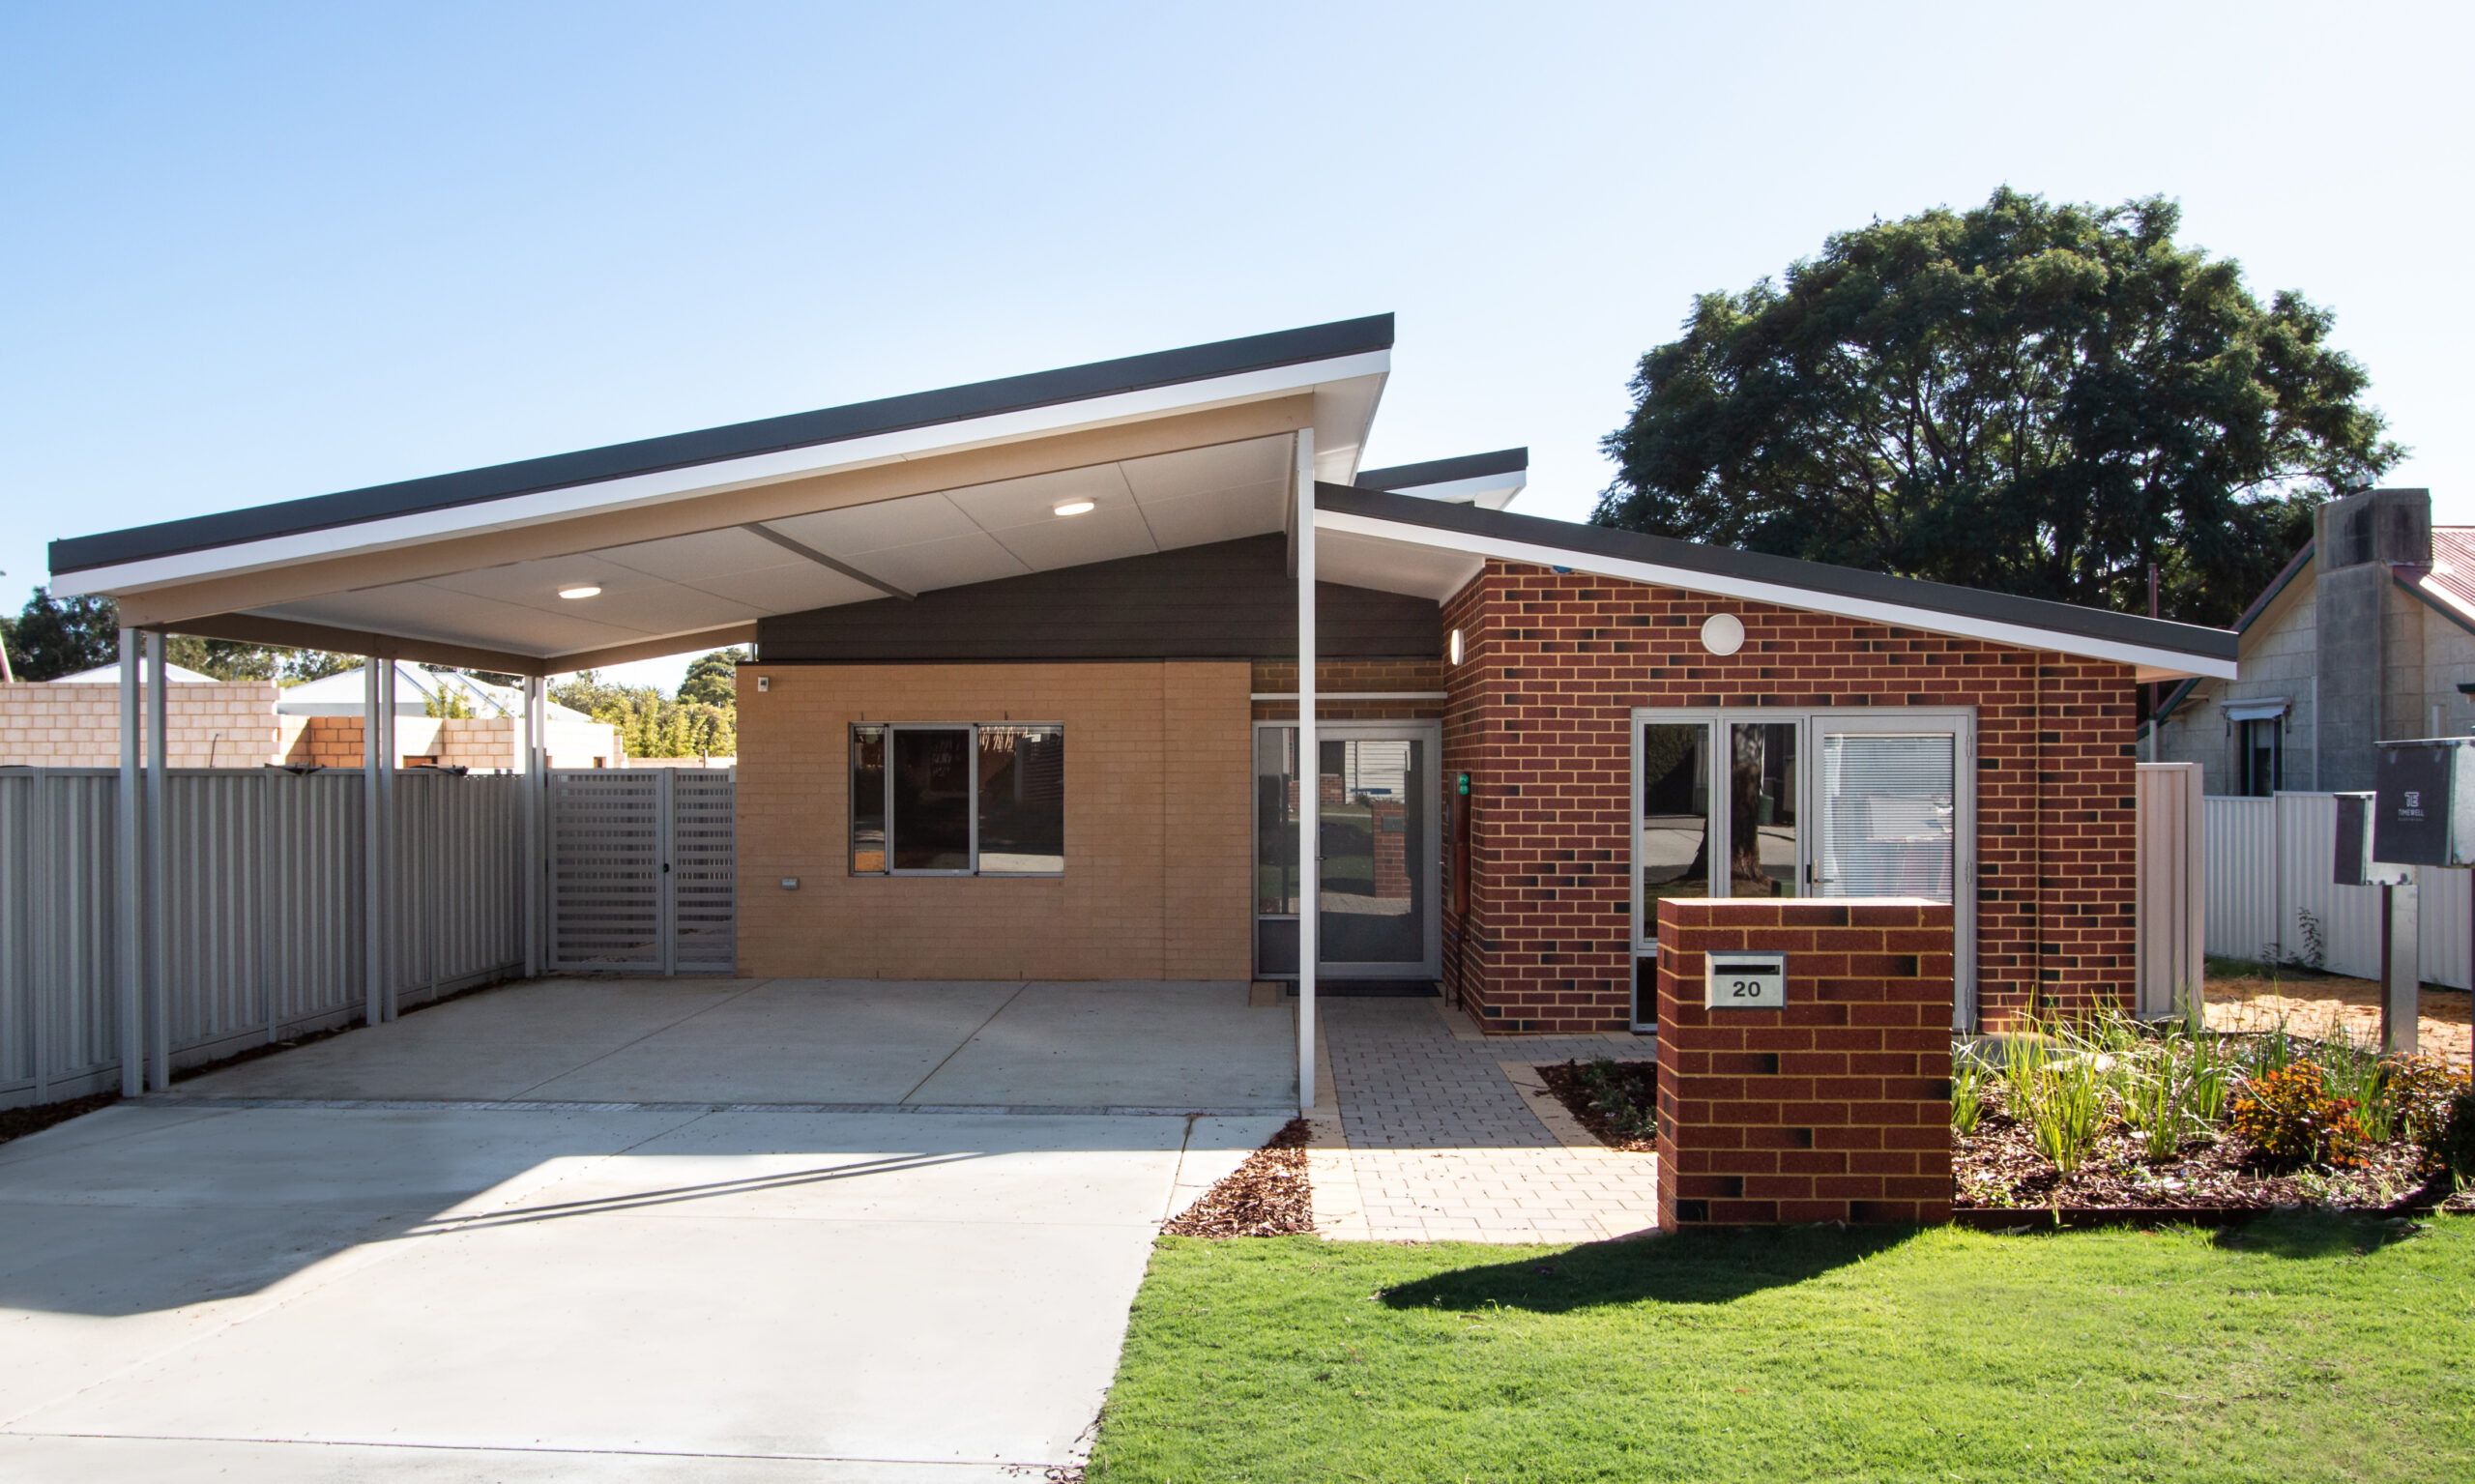 Design Features of NDIS Housing to Maximize Independence